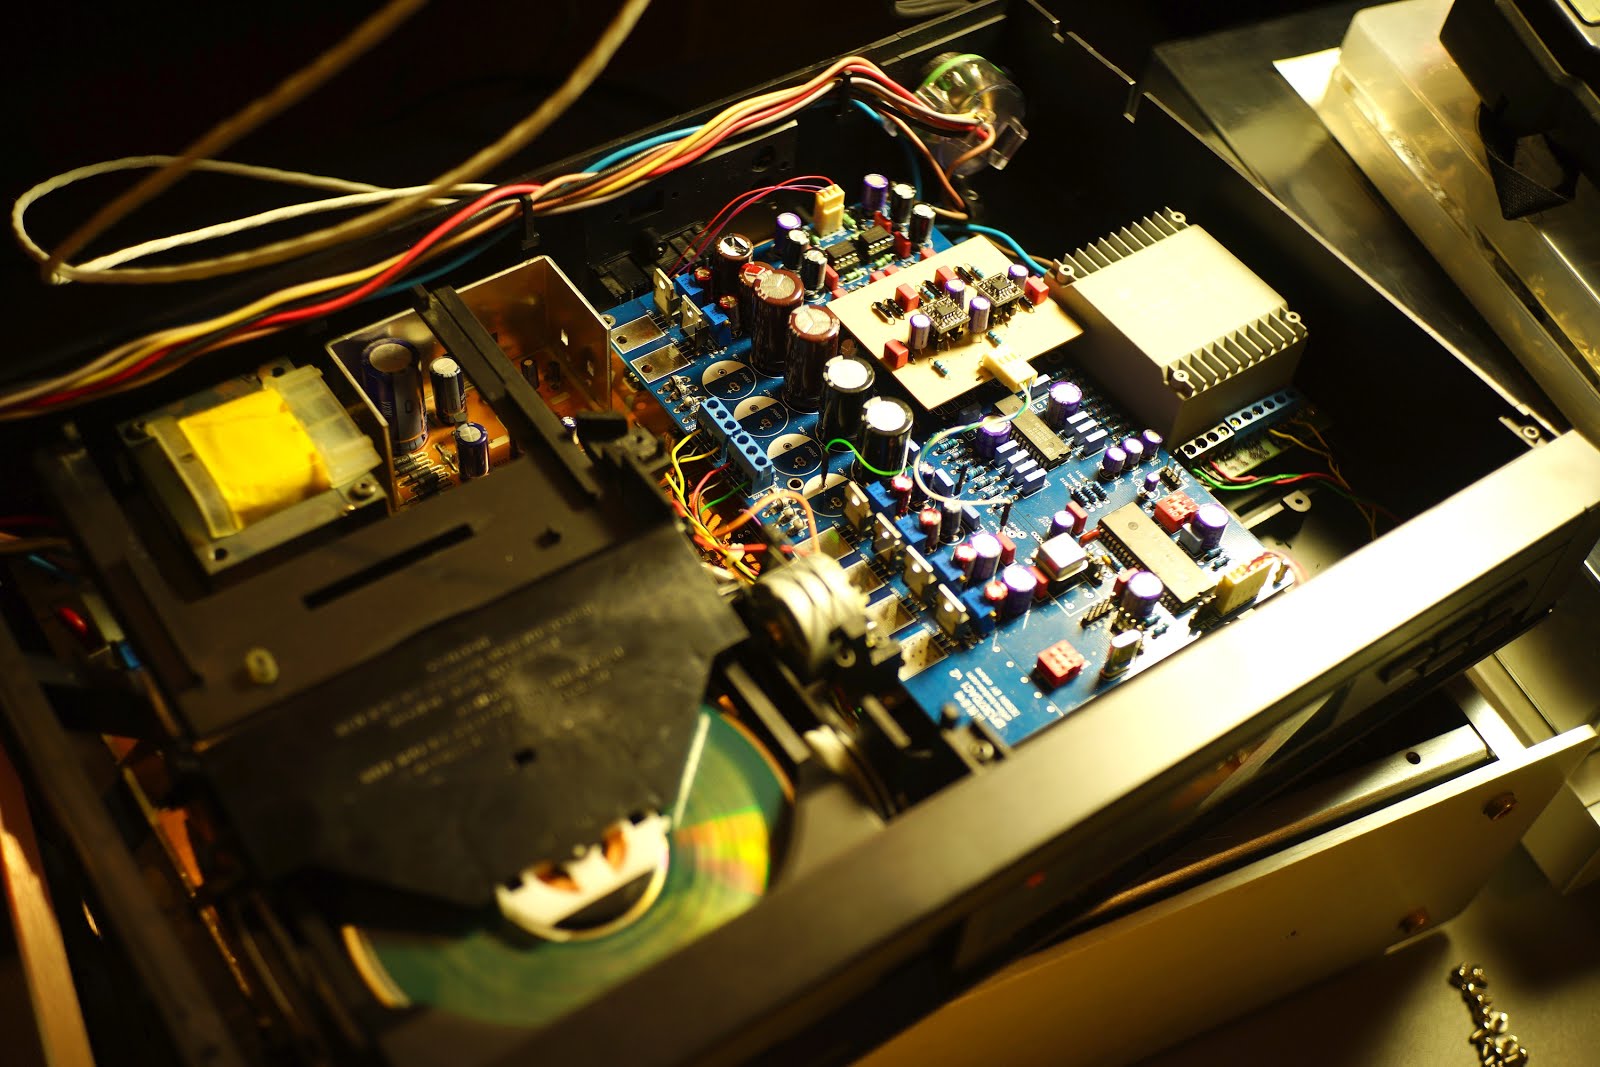 Turning budget CD player to audiophilic gear